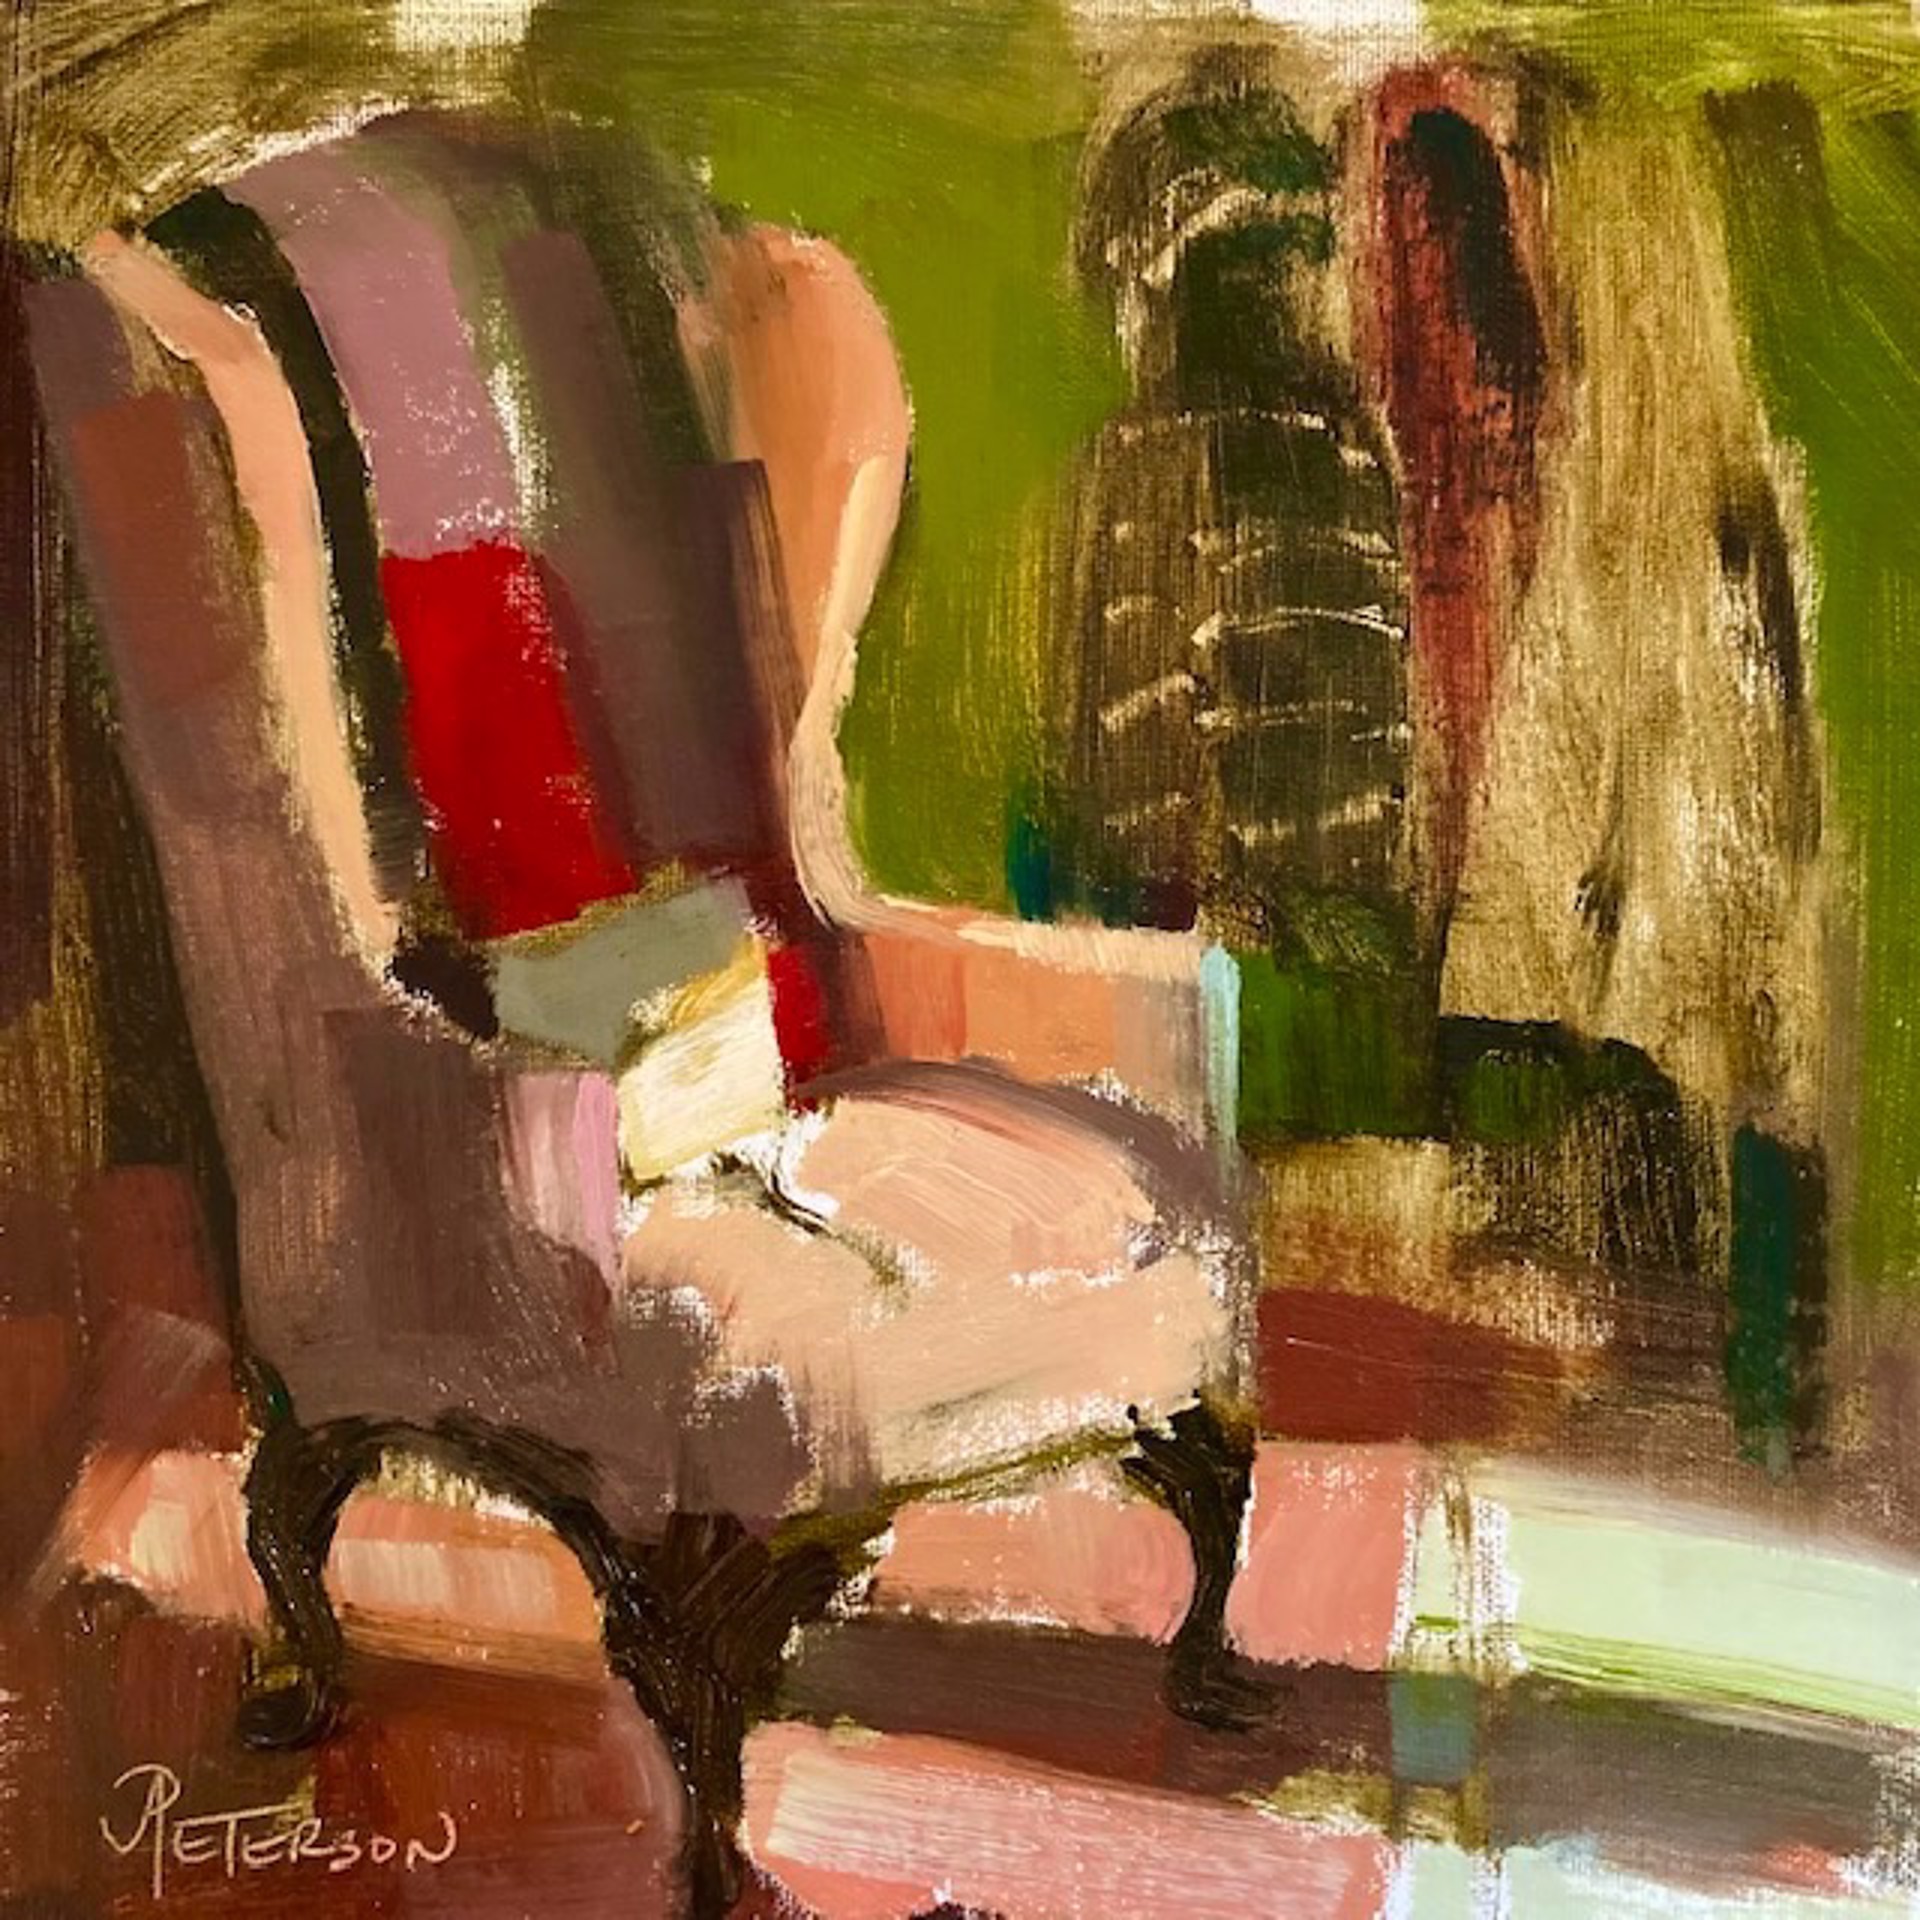 Sunbeam on Reading Chair by Amy R. Peterson